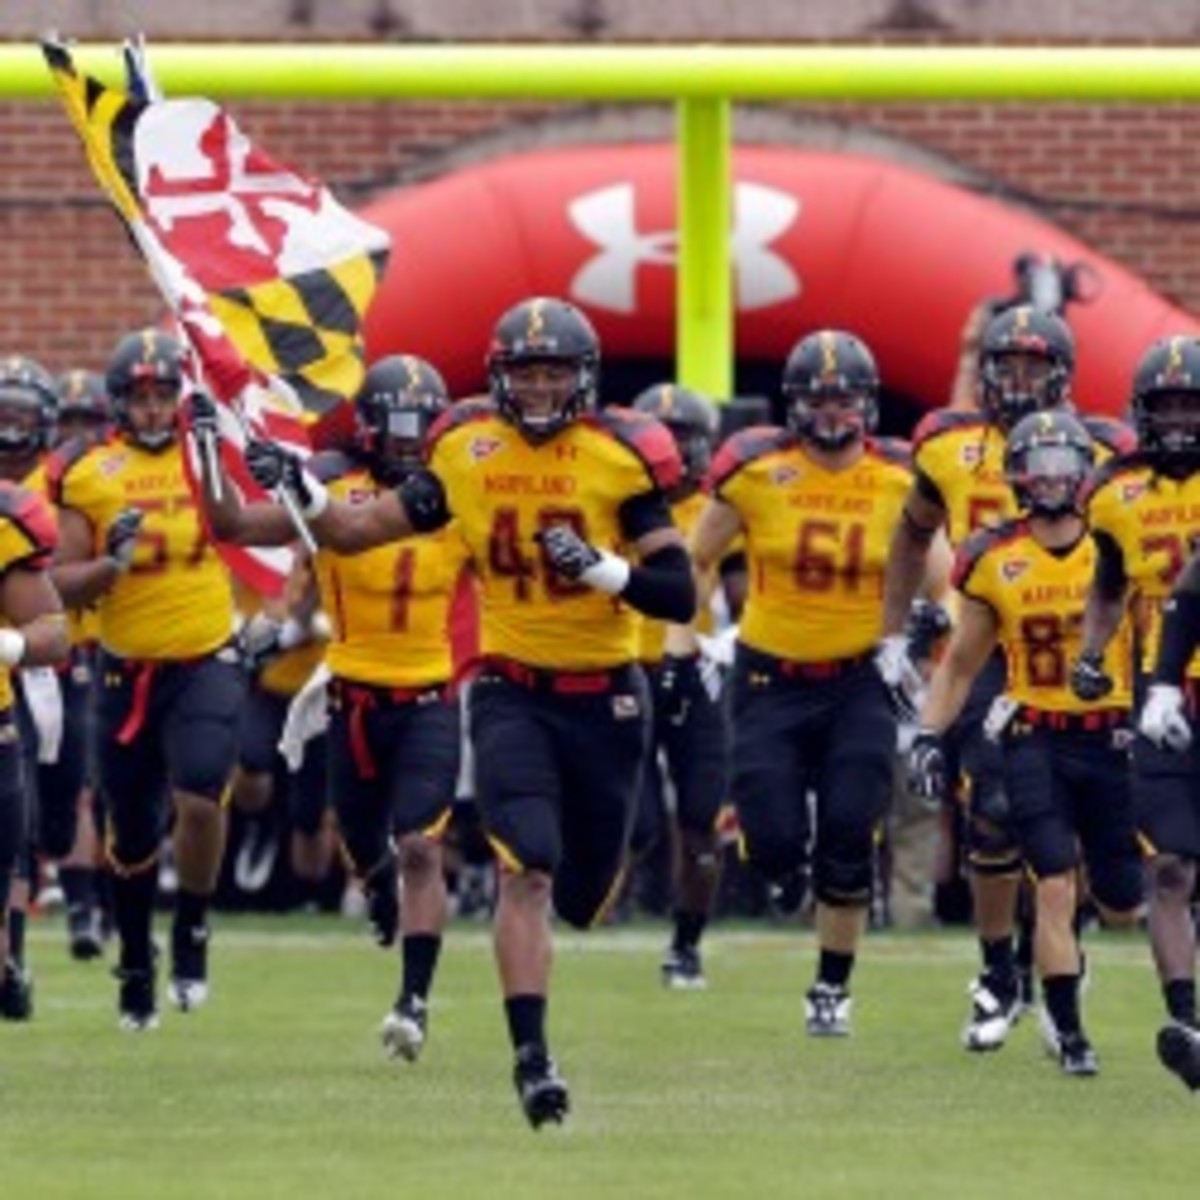 Defensive back Matt Robinson #40 of the Maryland Terrapins leads the team onto the field. (Photo by Rob Carr/Getty Images)